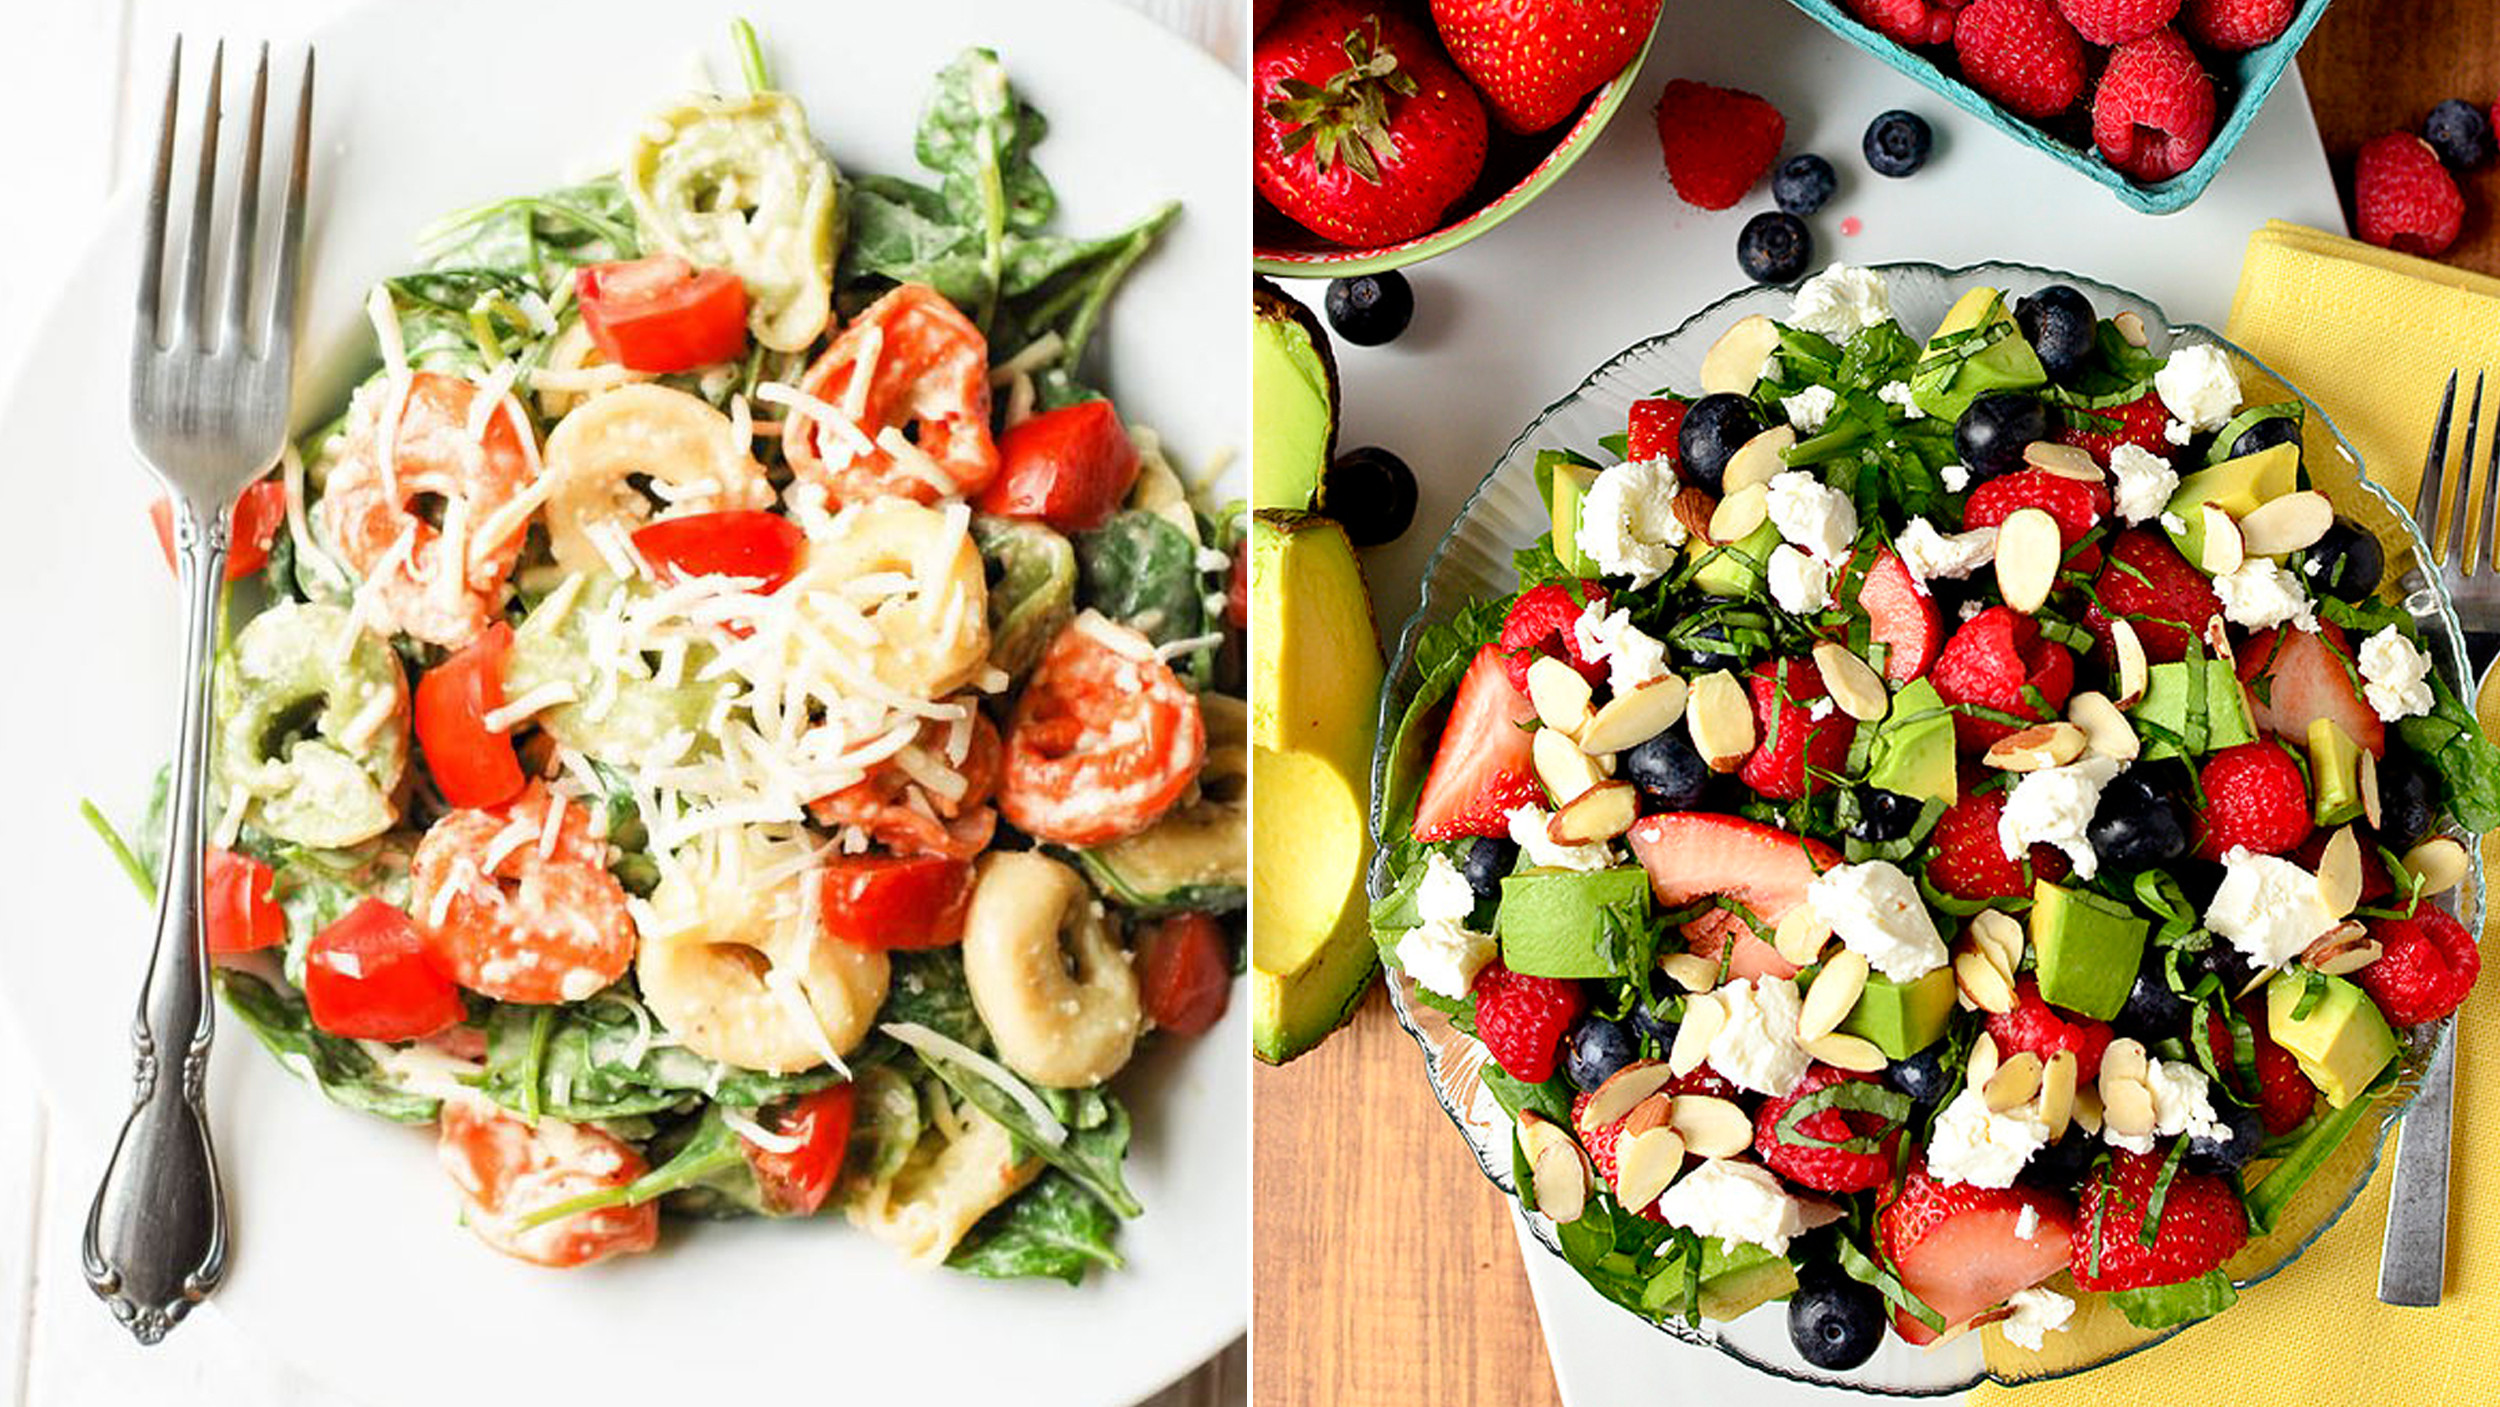 Healthy Snacks Pinterest
 7 Pinterest approved healthy summer salad recipes TODAY